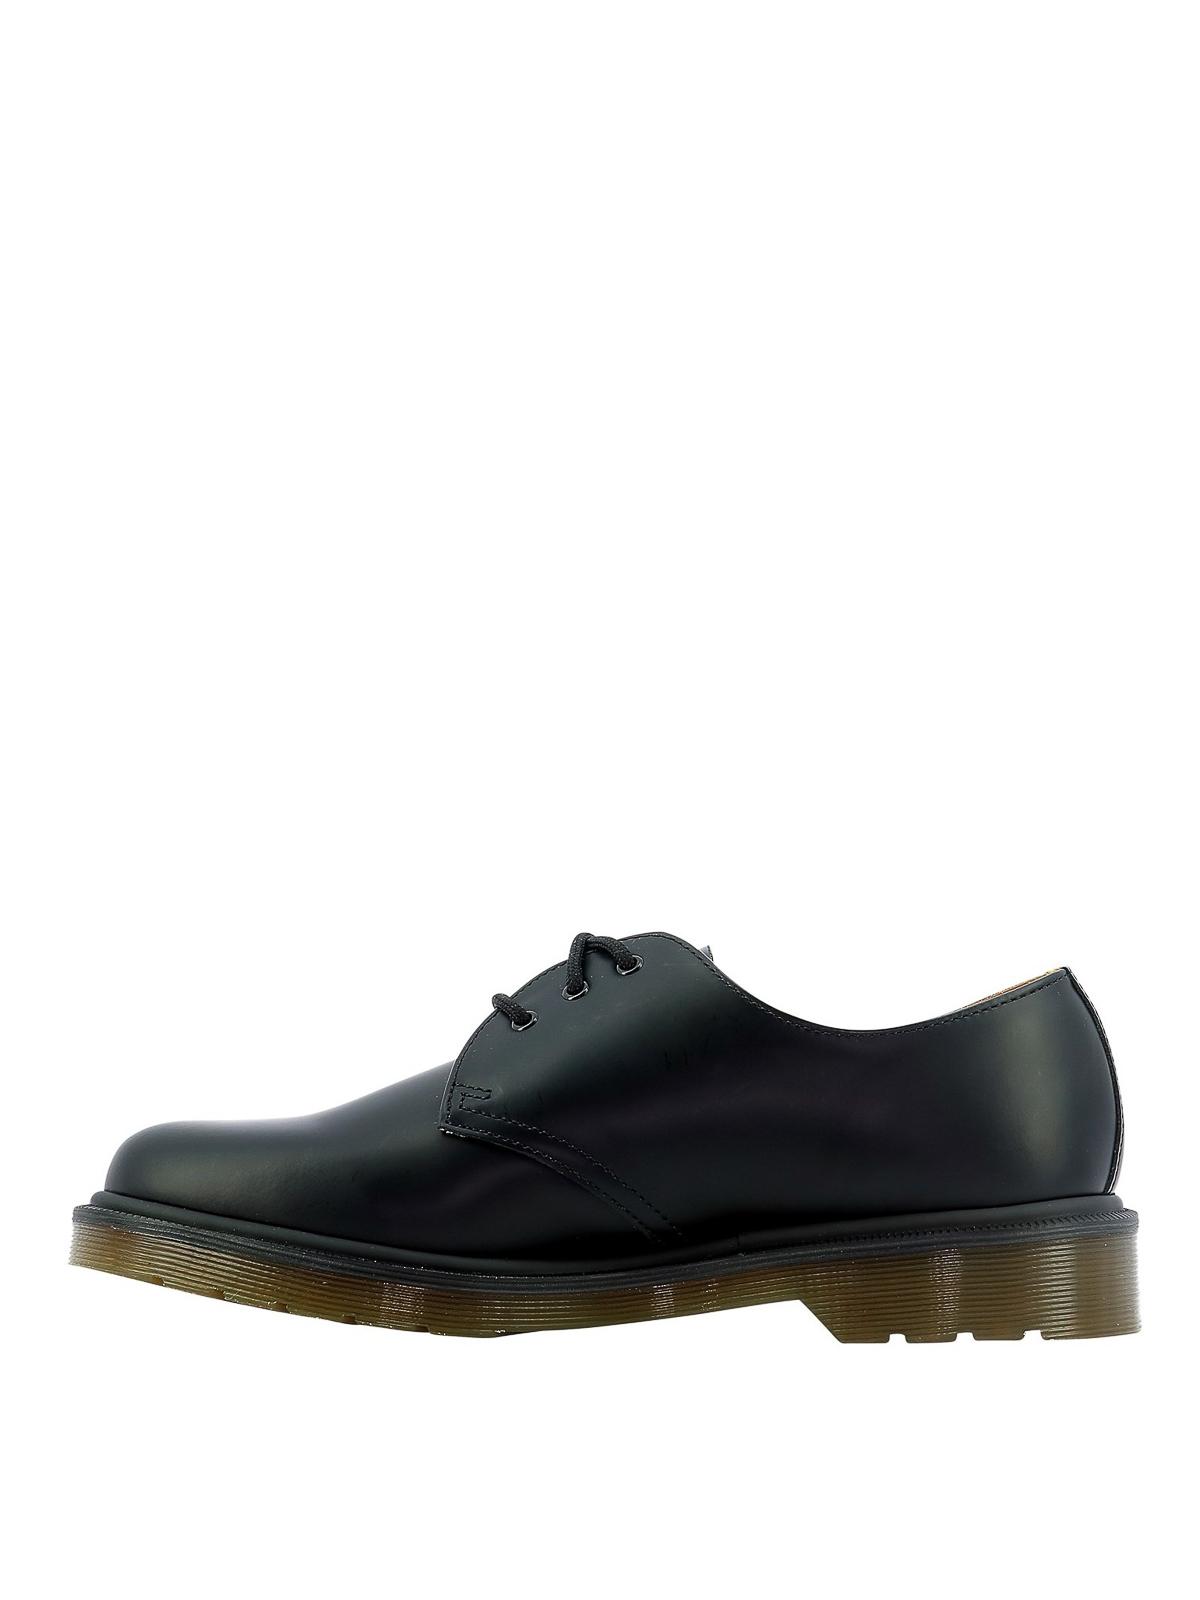 Dr. Martens 1461 59 Lace-up Shoes in Black for Men - Save 40% - Lyst